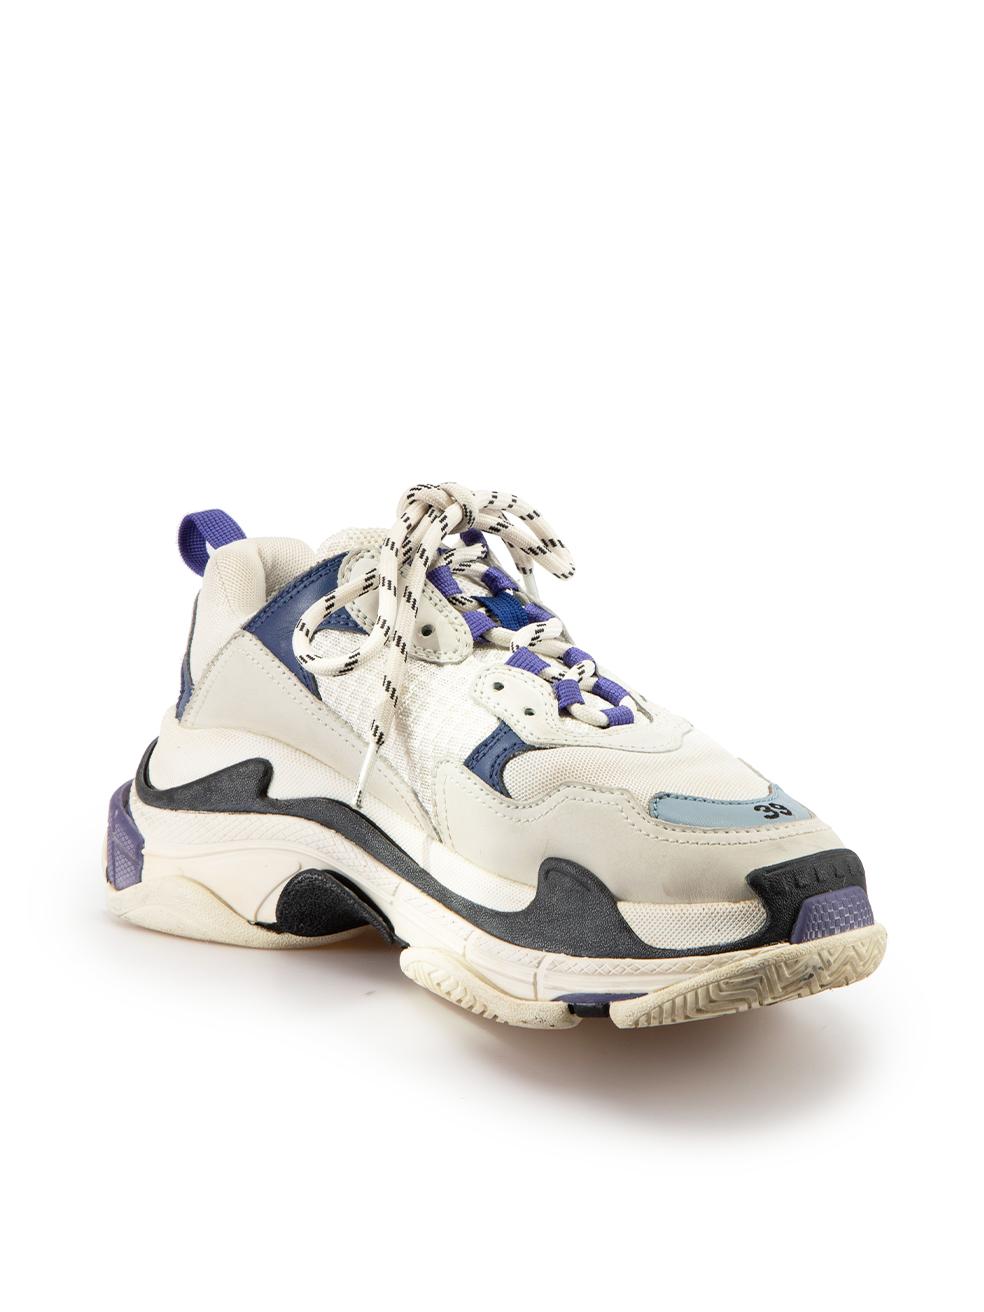 CONDITION is Good. General wear to trainers is evident. Moderate signs of wear to upper with a number of discoloured marks and scuffs found throughout on this used Balenciaga designer resale 
item.  

Details
Triple S
Multicolour
Cloth and